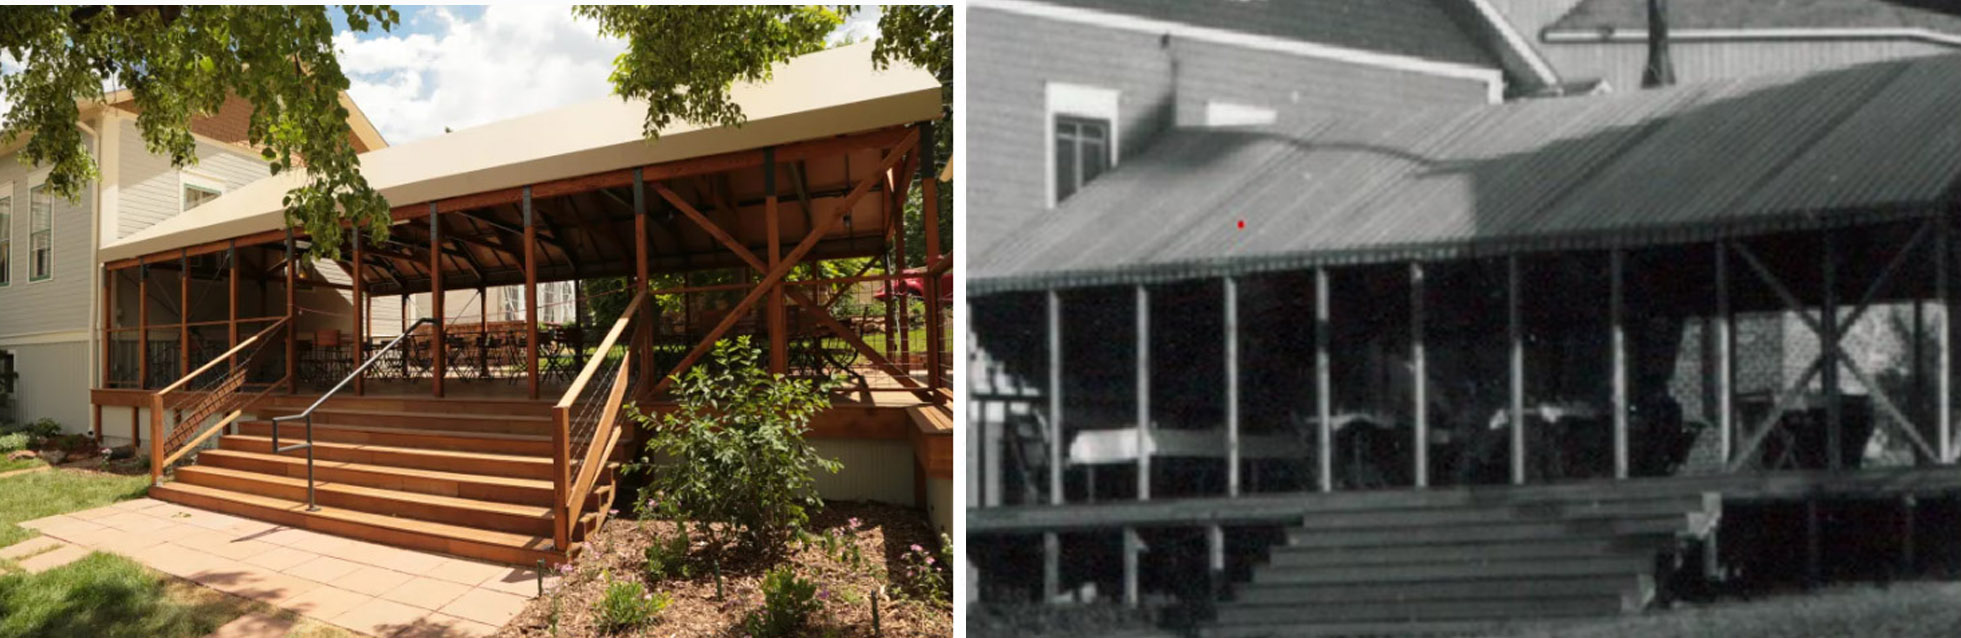 Chautauqua Cafe Pavilion before and after